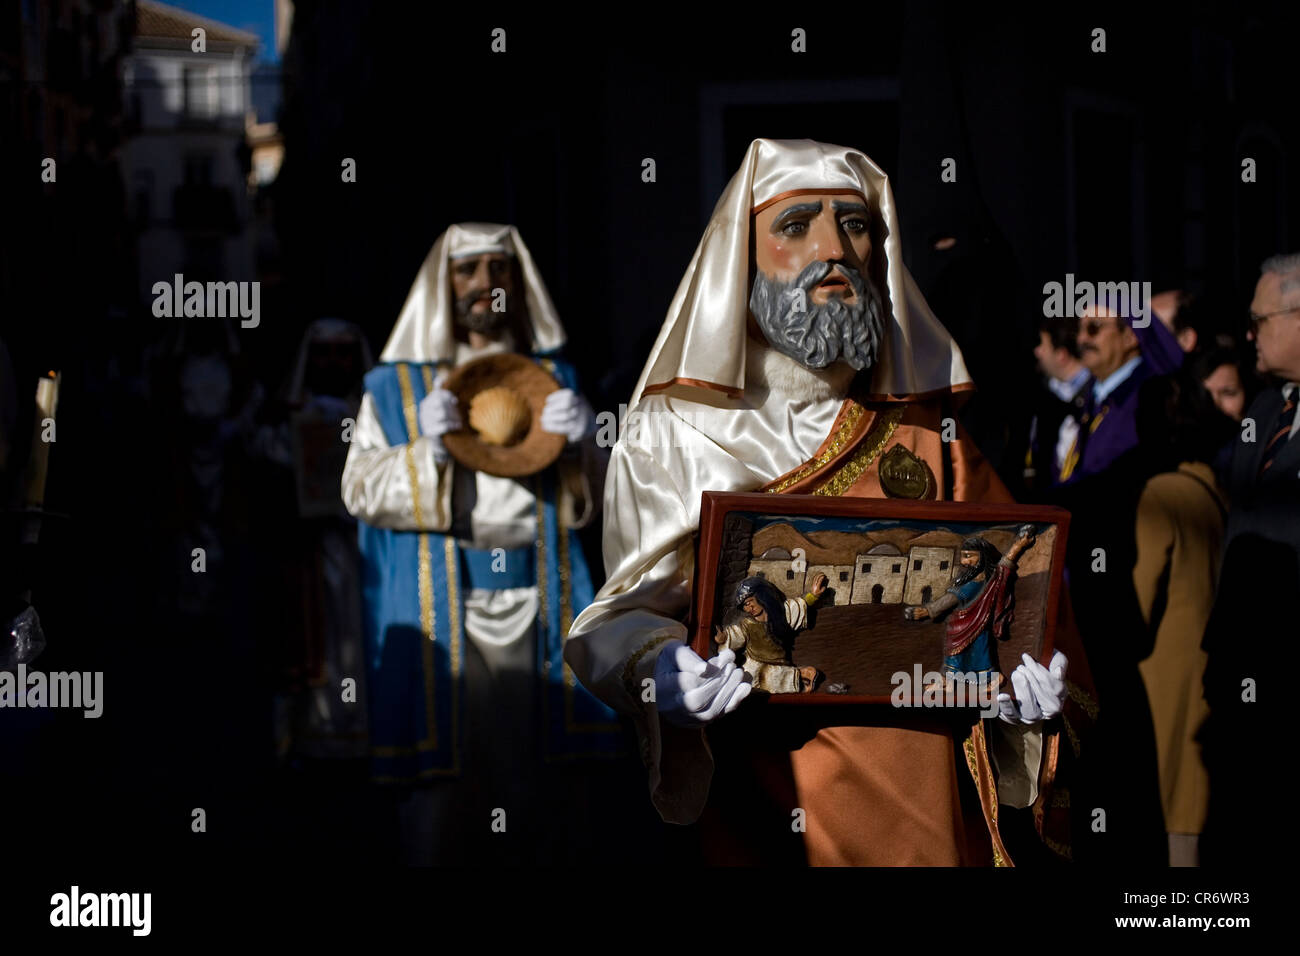 Masked men dressed as biblical characters walk through the street holding miniatures during an Easter Holy Week procession Stock Photo